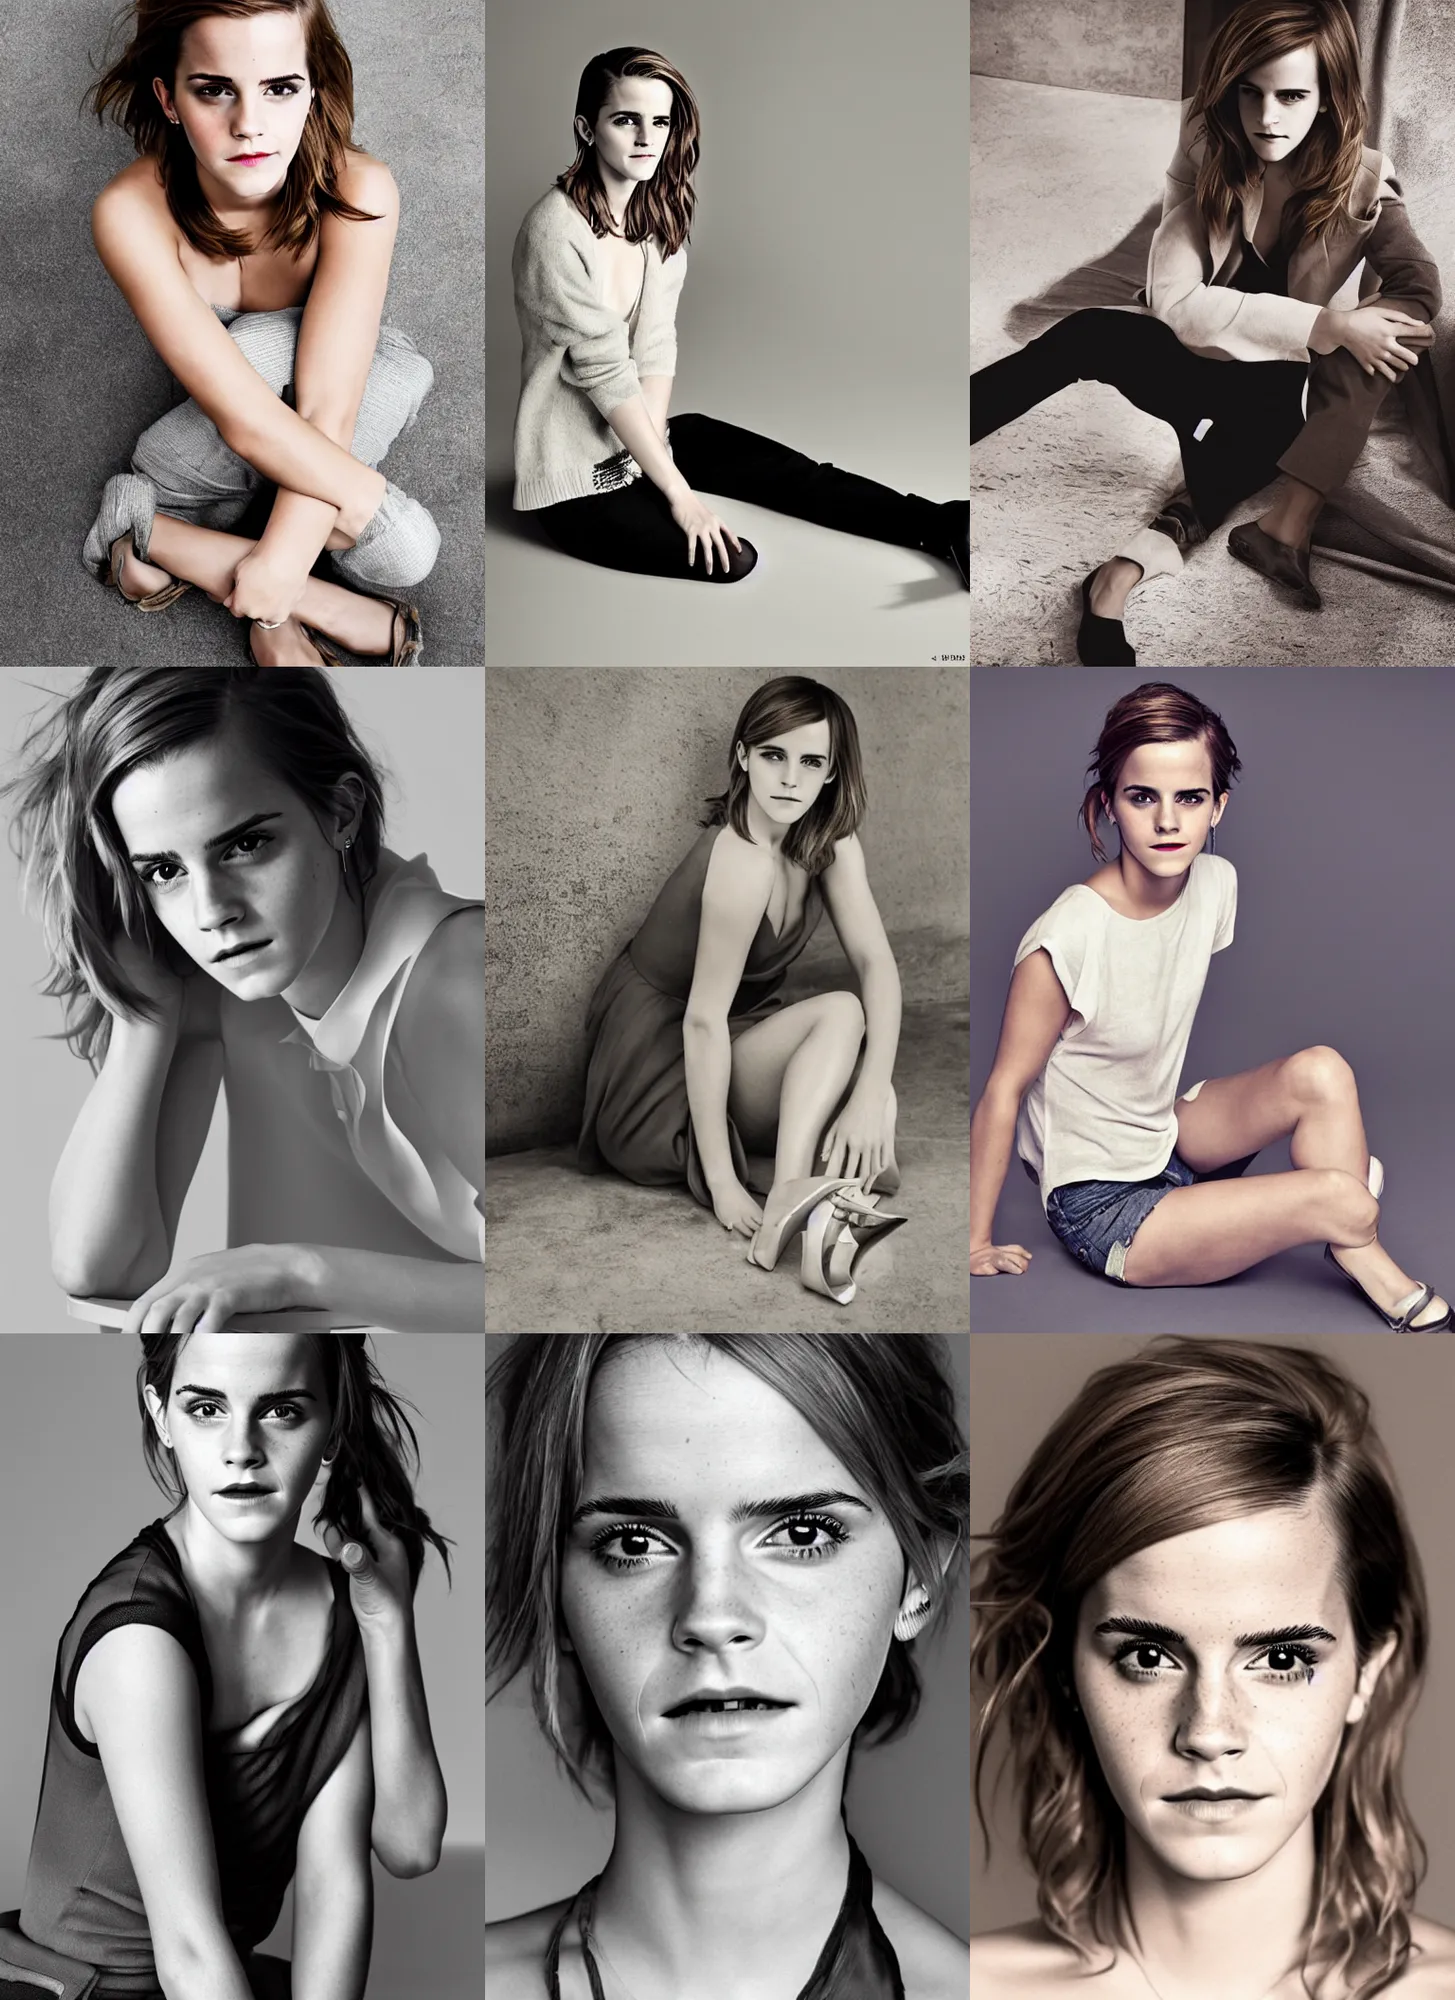 Prompt: Emma Watson sitting on the floor by Peter Hurley for GQ, XF IQ4, 150MP, 50mm, f/1.4, ISO 200, 1/160s, natural light, Adobe Photoshop, Adobe Lightroom, DxO Photolab, Corel PaintShop Pro, rule of thirds, symmetrical balance, depth layering, polarizing filter, Sense of Depth, AI enhanced, HDR